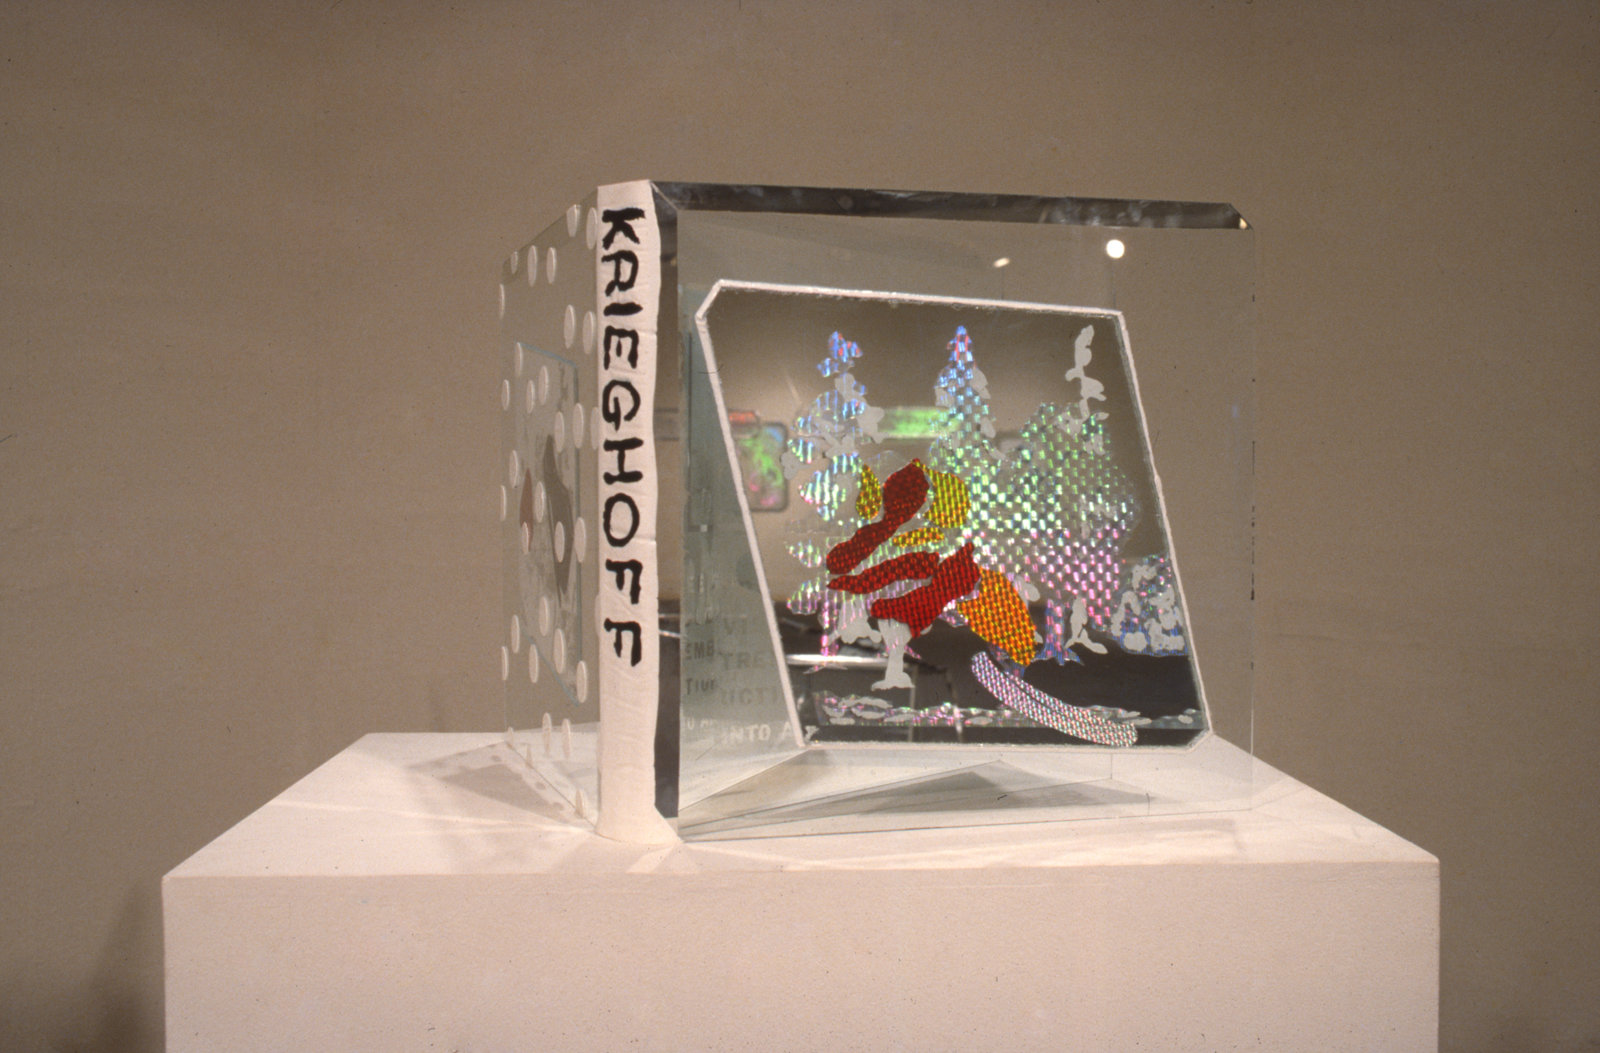 Jerry Pethick, Krieghoff Book, 1978–1979, etched glass, mirror, silicone sealant, coloured diffraction grating, 18 x 18 x 2 in. (46 x 46 x 5 cm)